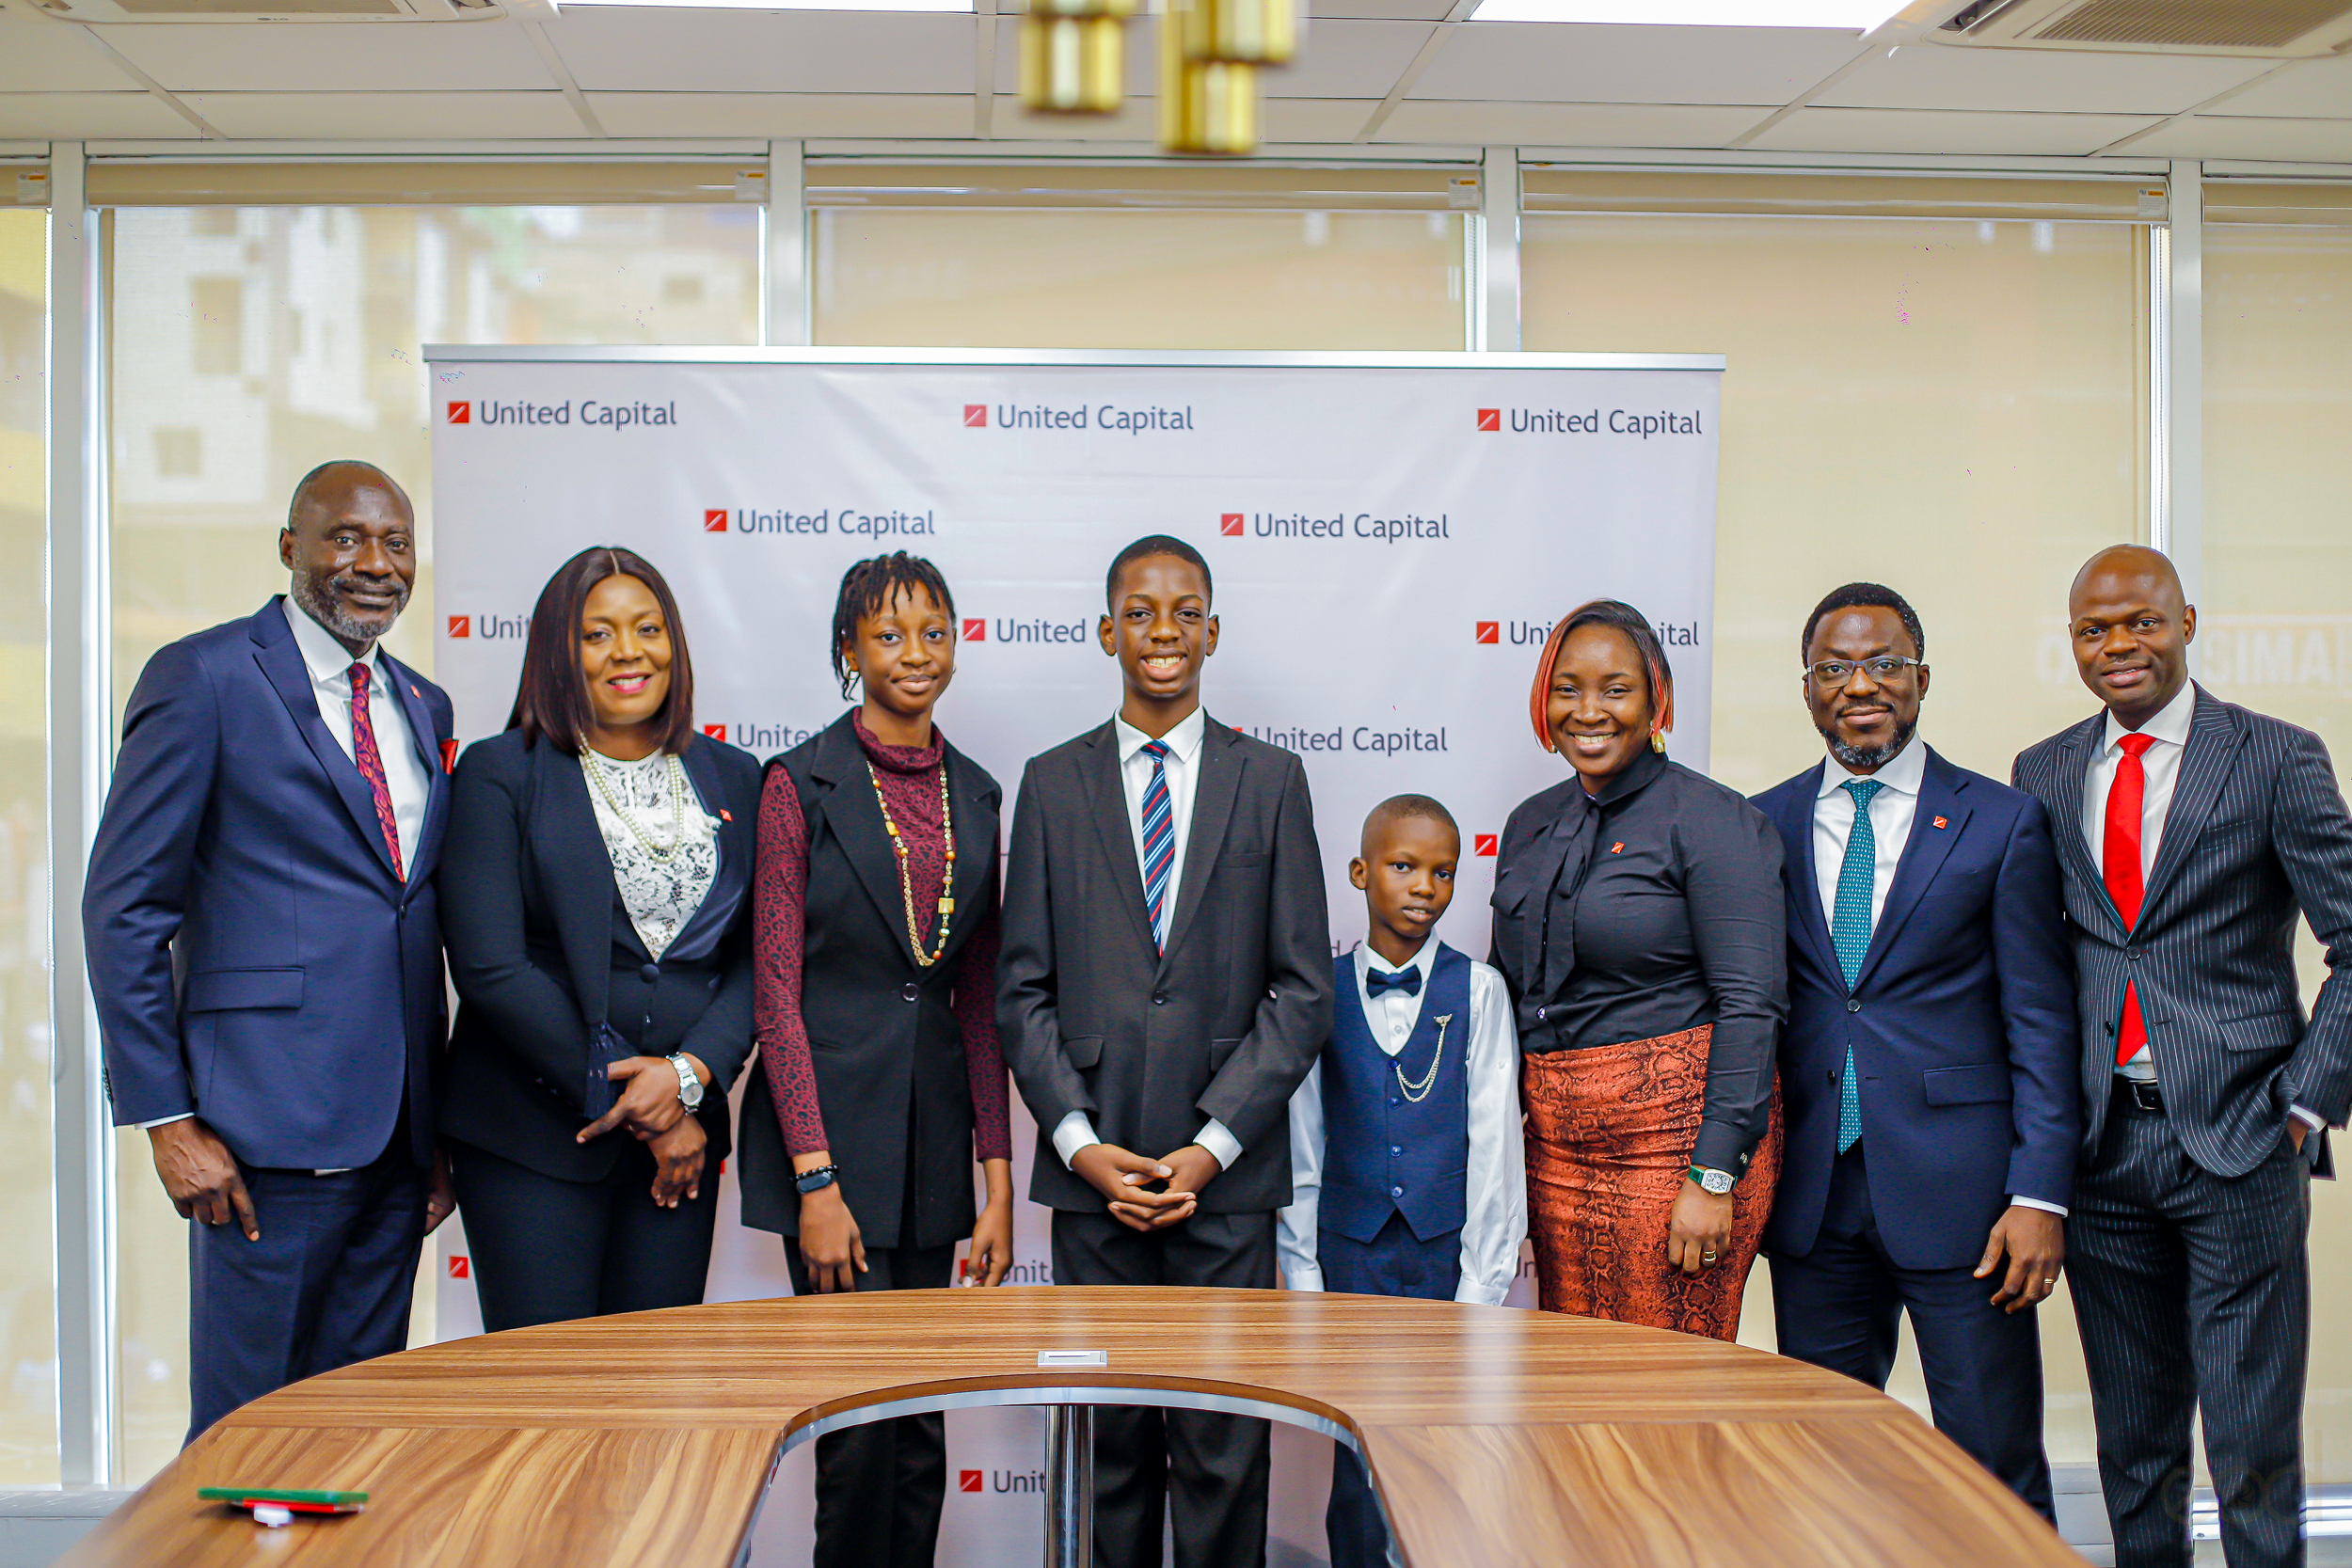 United Capital Plc CEO for a Day